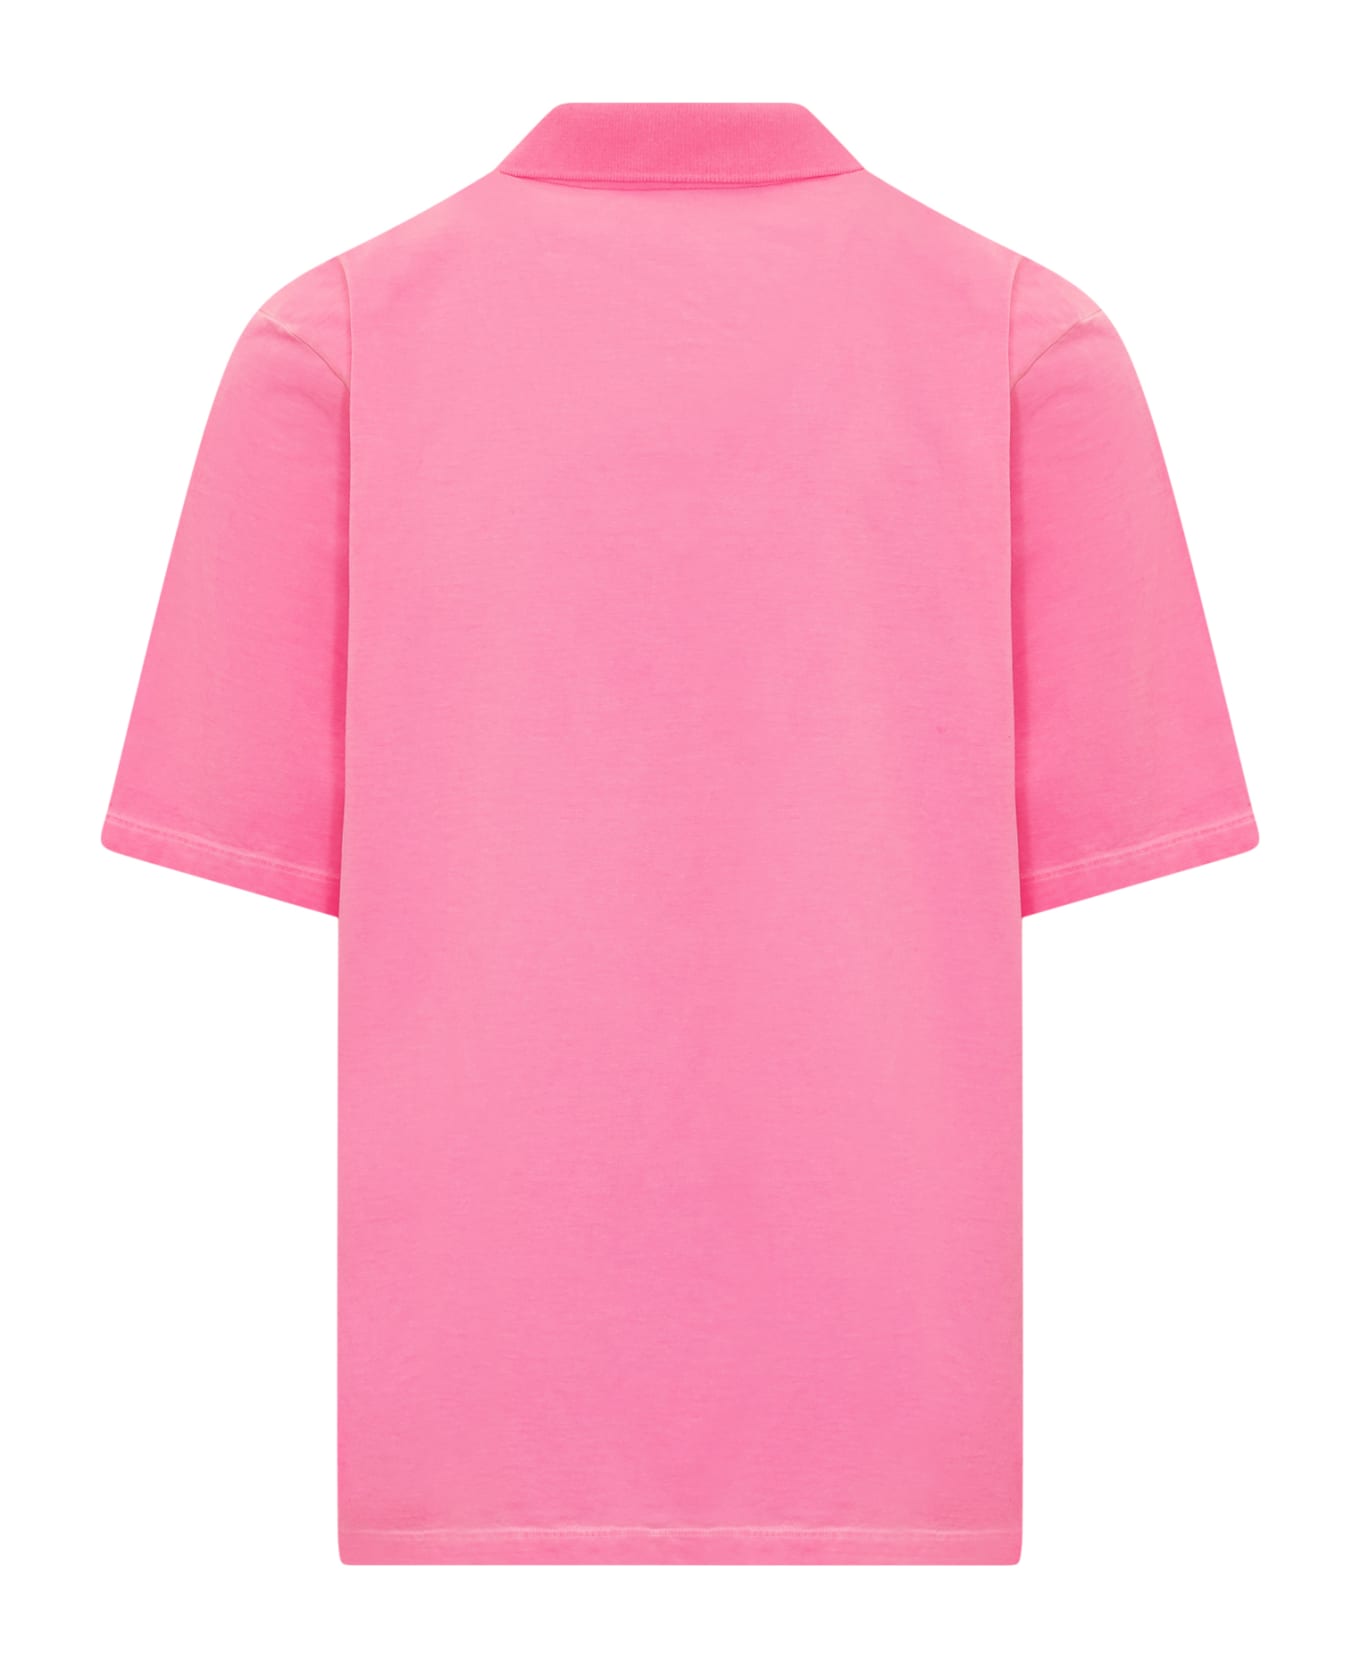 Dsquared2 Fish Skater Polo - PINK FLUO ポロシャツ